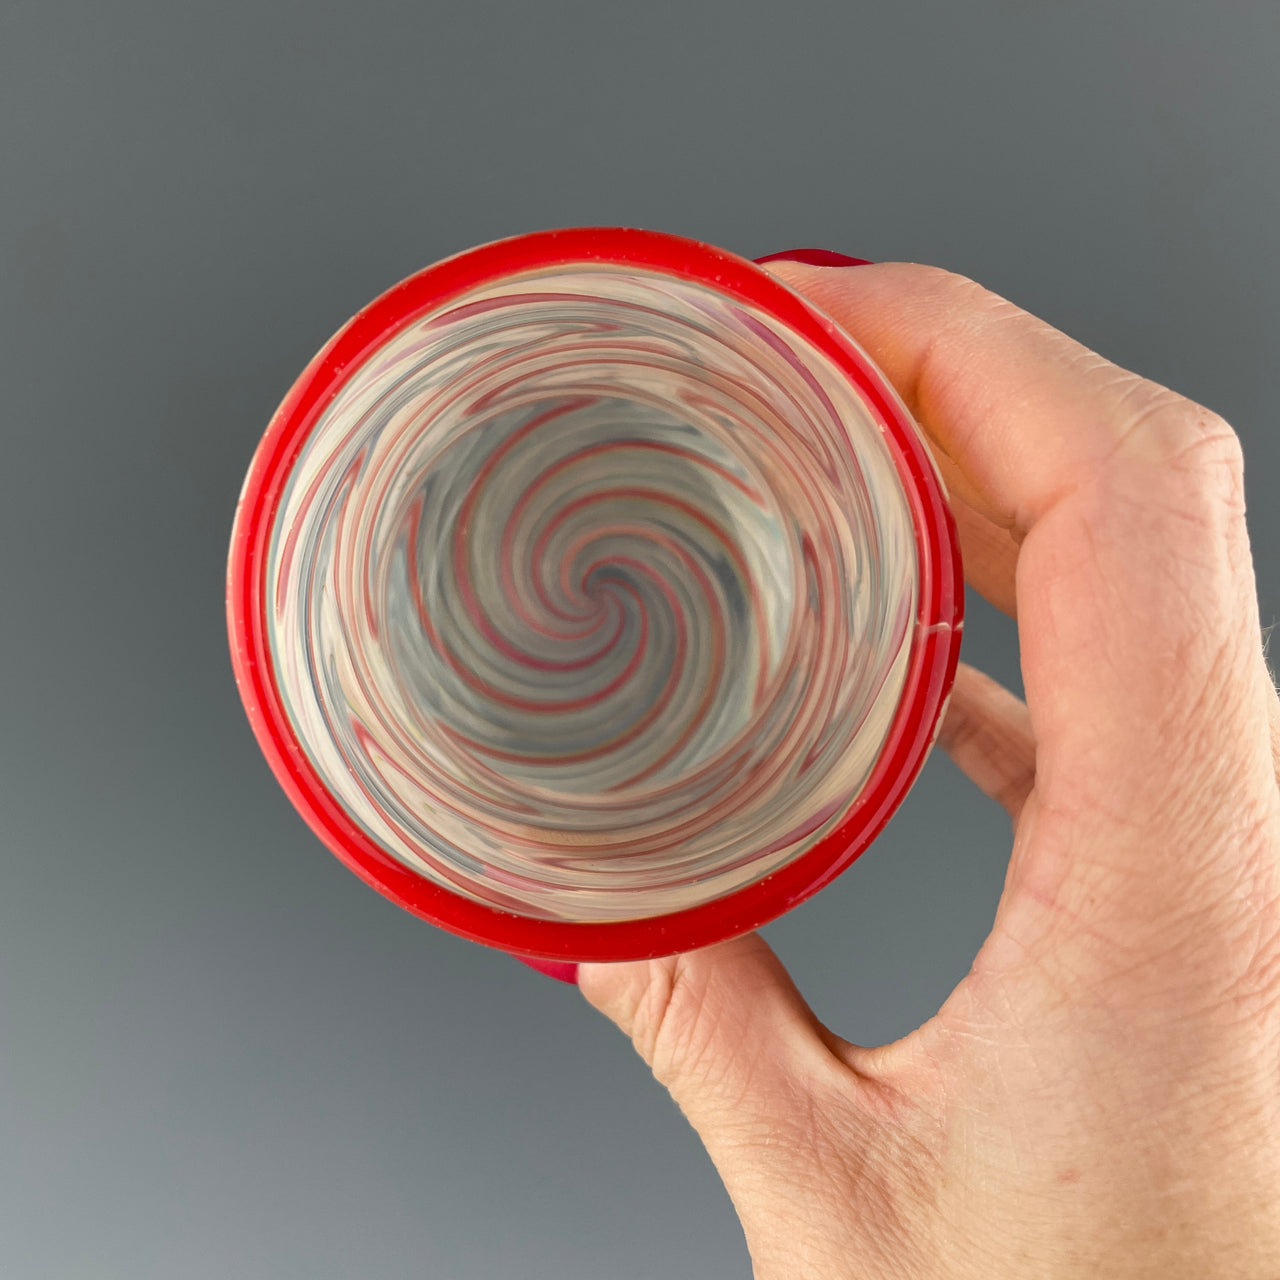 inside of a clear cup with red swirls